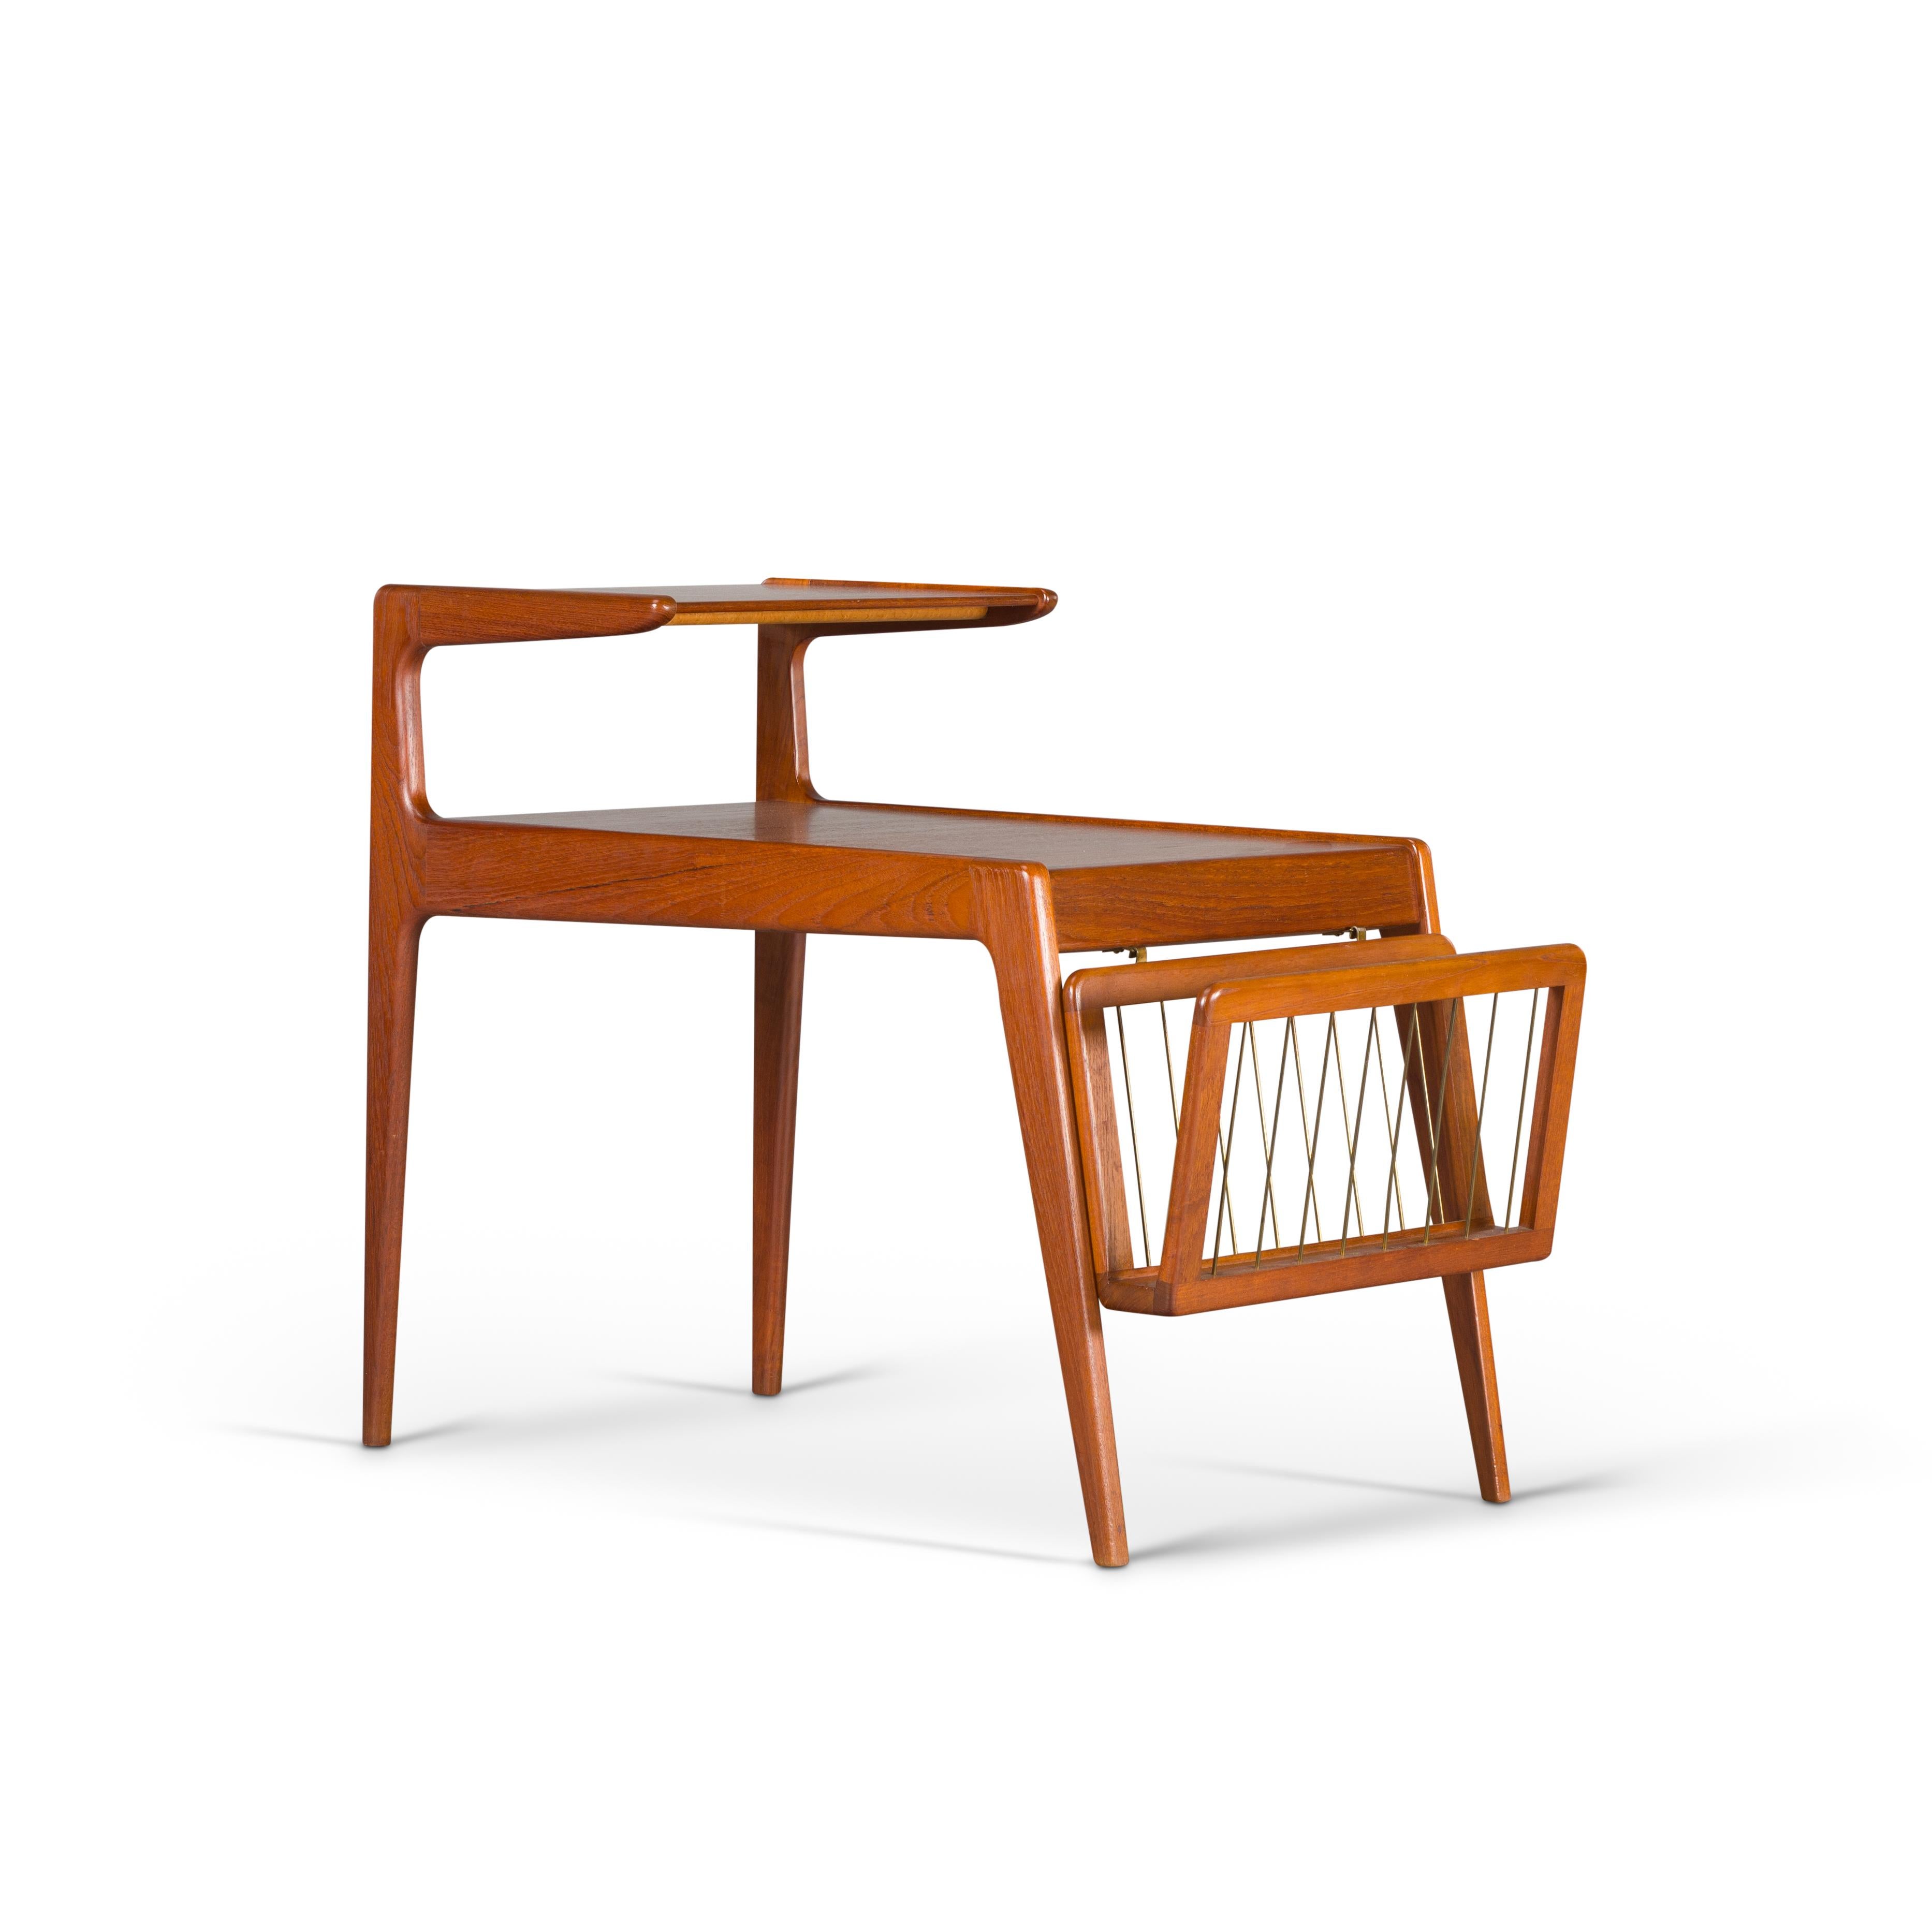 Danish teak side table with removable magazine rack designed by Kurt Ostervig for Jason Møbler. The design encompasses a top tier a lower tier and a magazine rack. The magazine rack can easily hold 10 magazines or newspapers and hooks into a set of